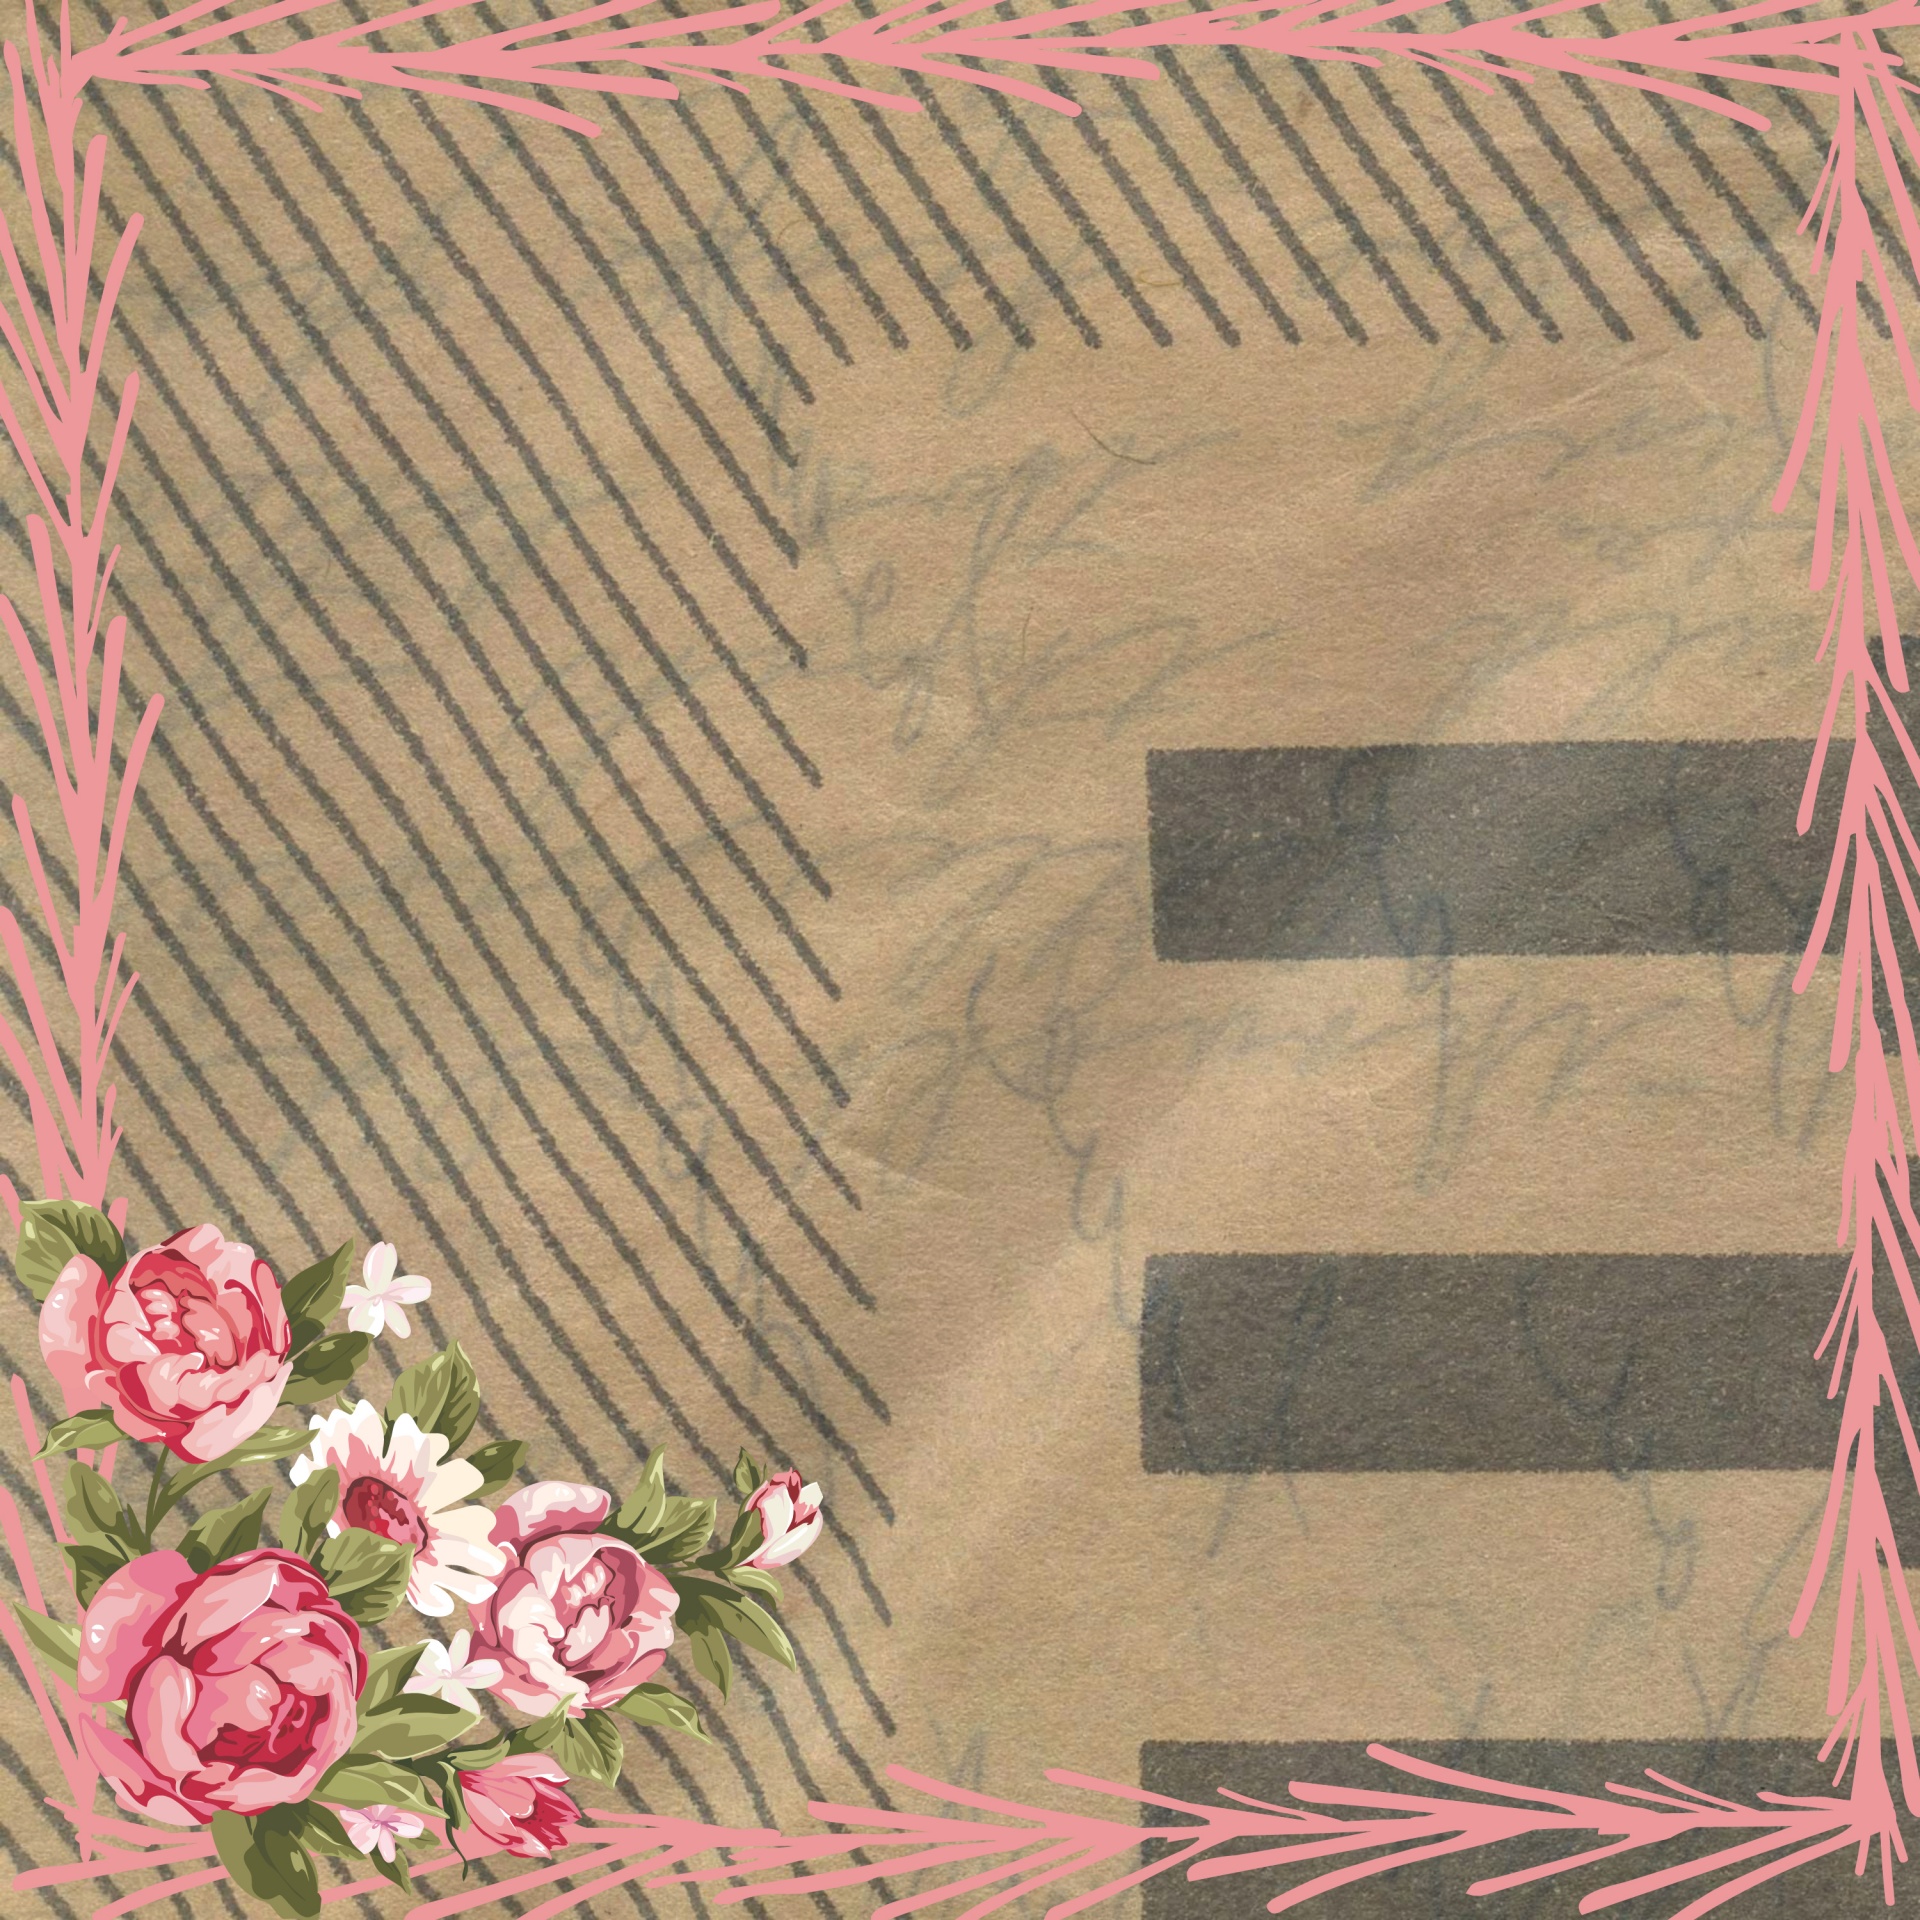 Scrapbook Paper Vintage Style With